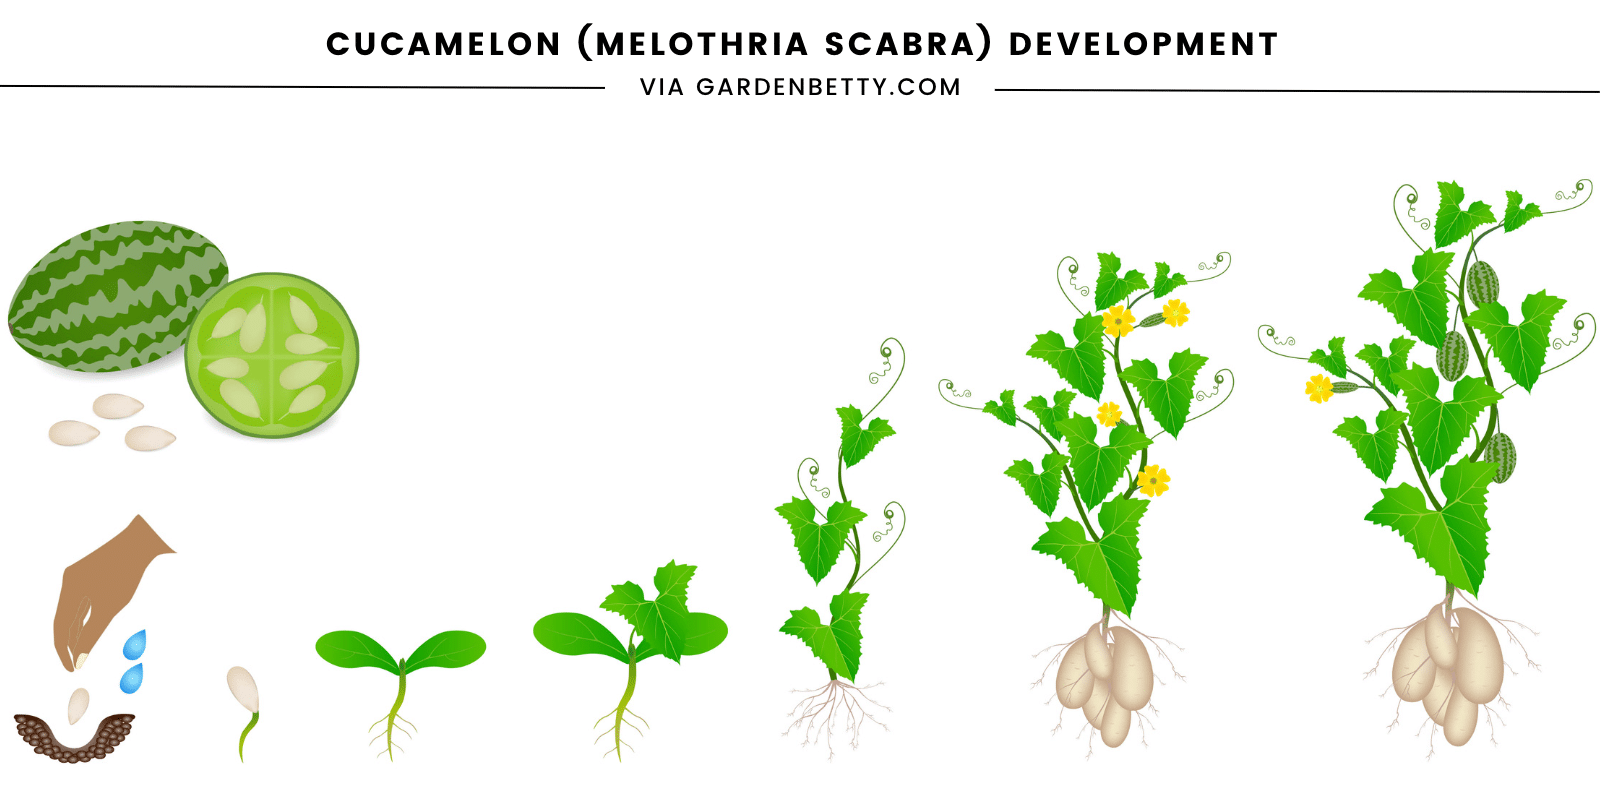 Illustration of the life cycle of a cucamelon (Mexican sour gherkin) from seed to maturity